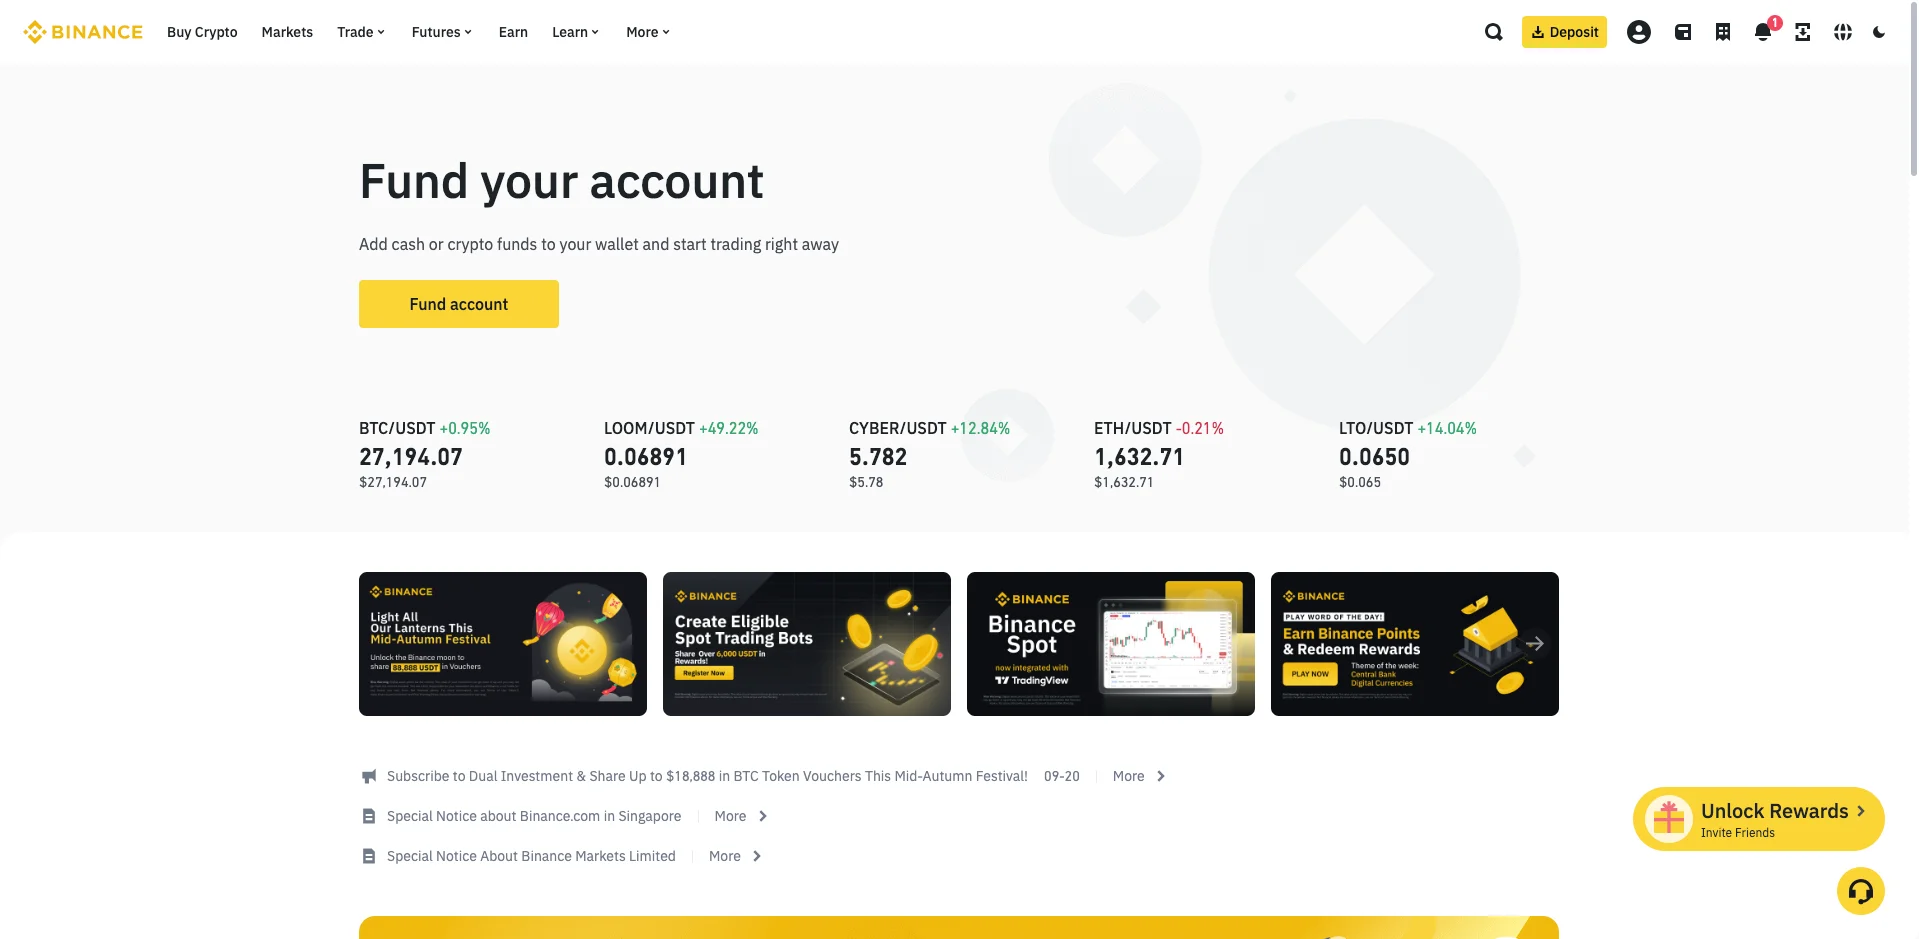 1. Sign up or sign in on Binance